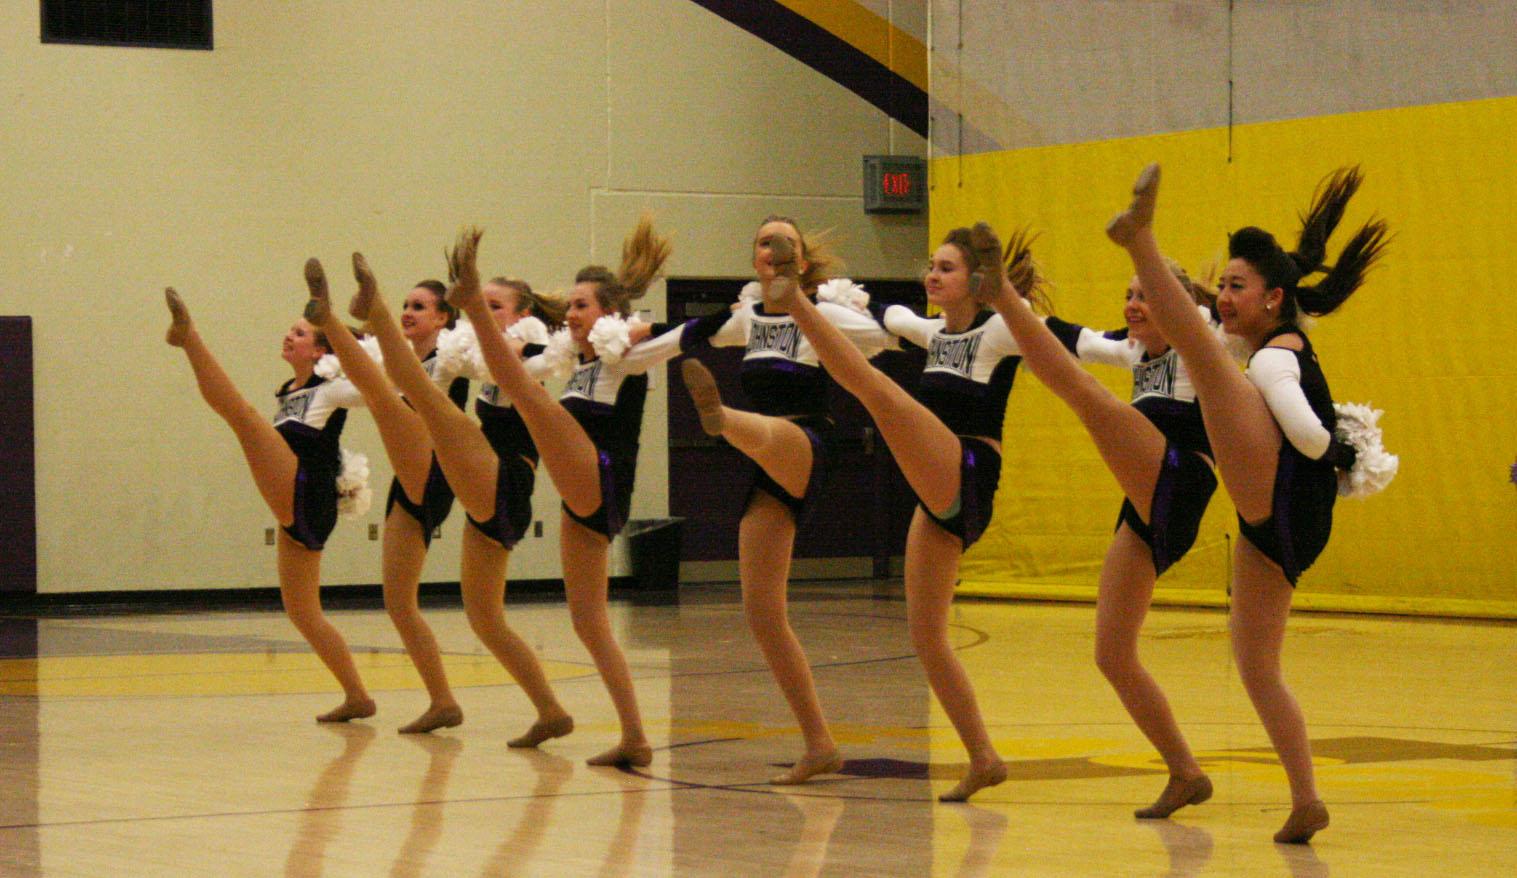 JV dance team dances their pom routine. All dance team members will attend a banquet March 29 to recognize their accomplishments over the year.